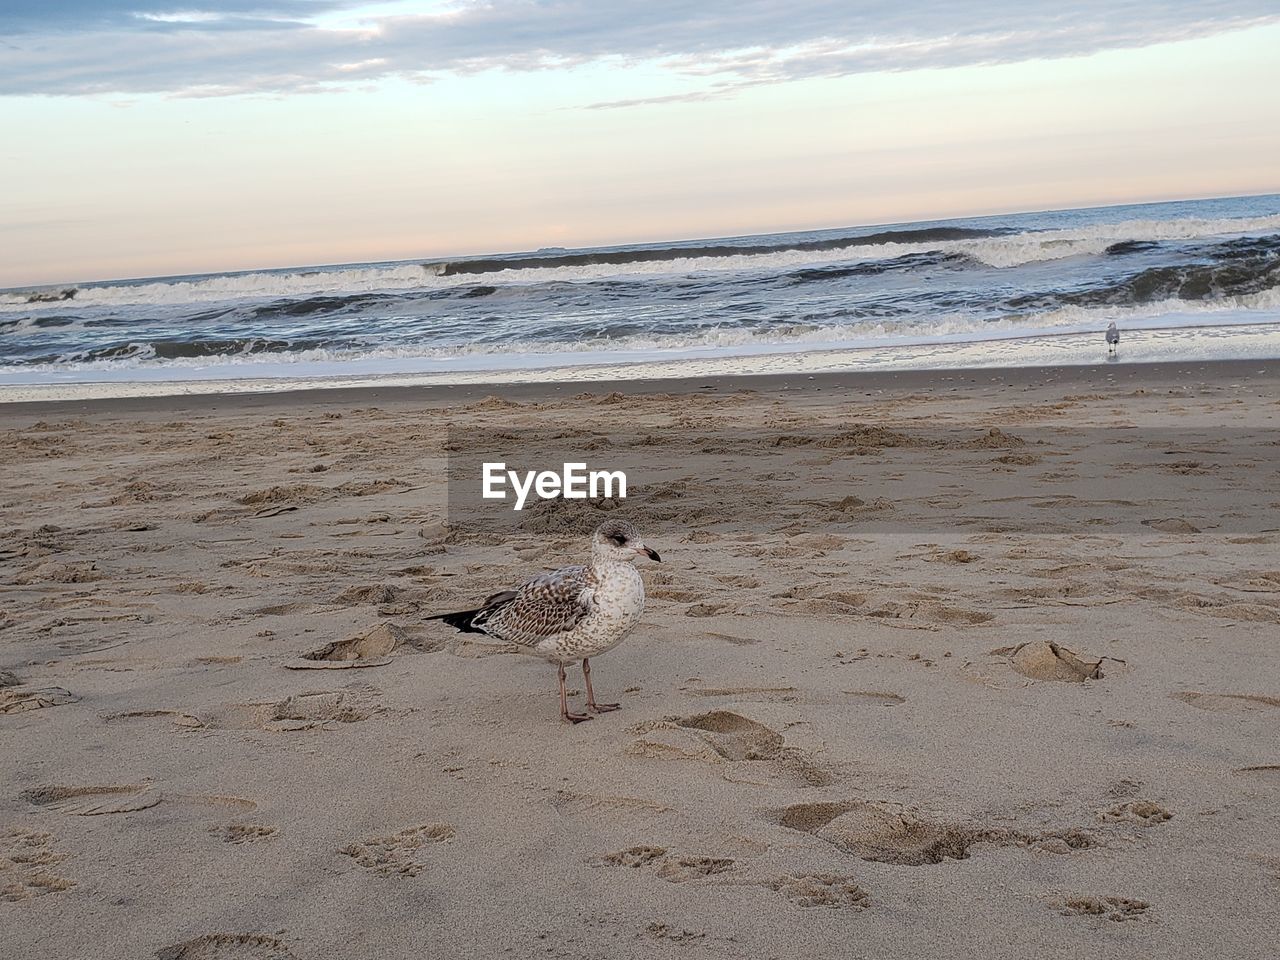 Seagull by the ocean 